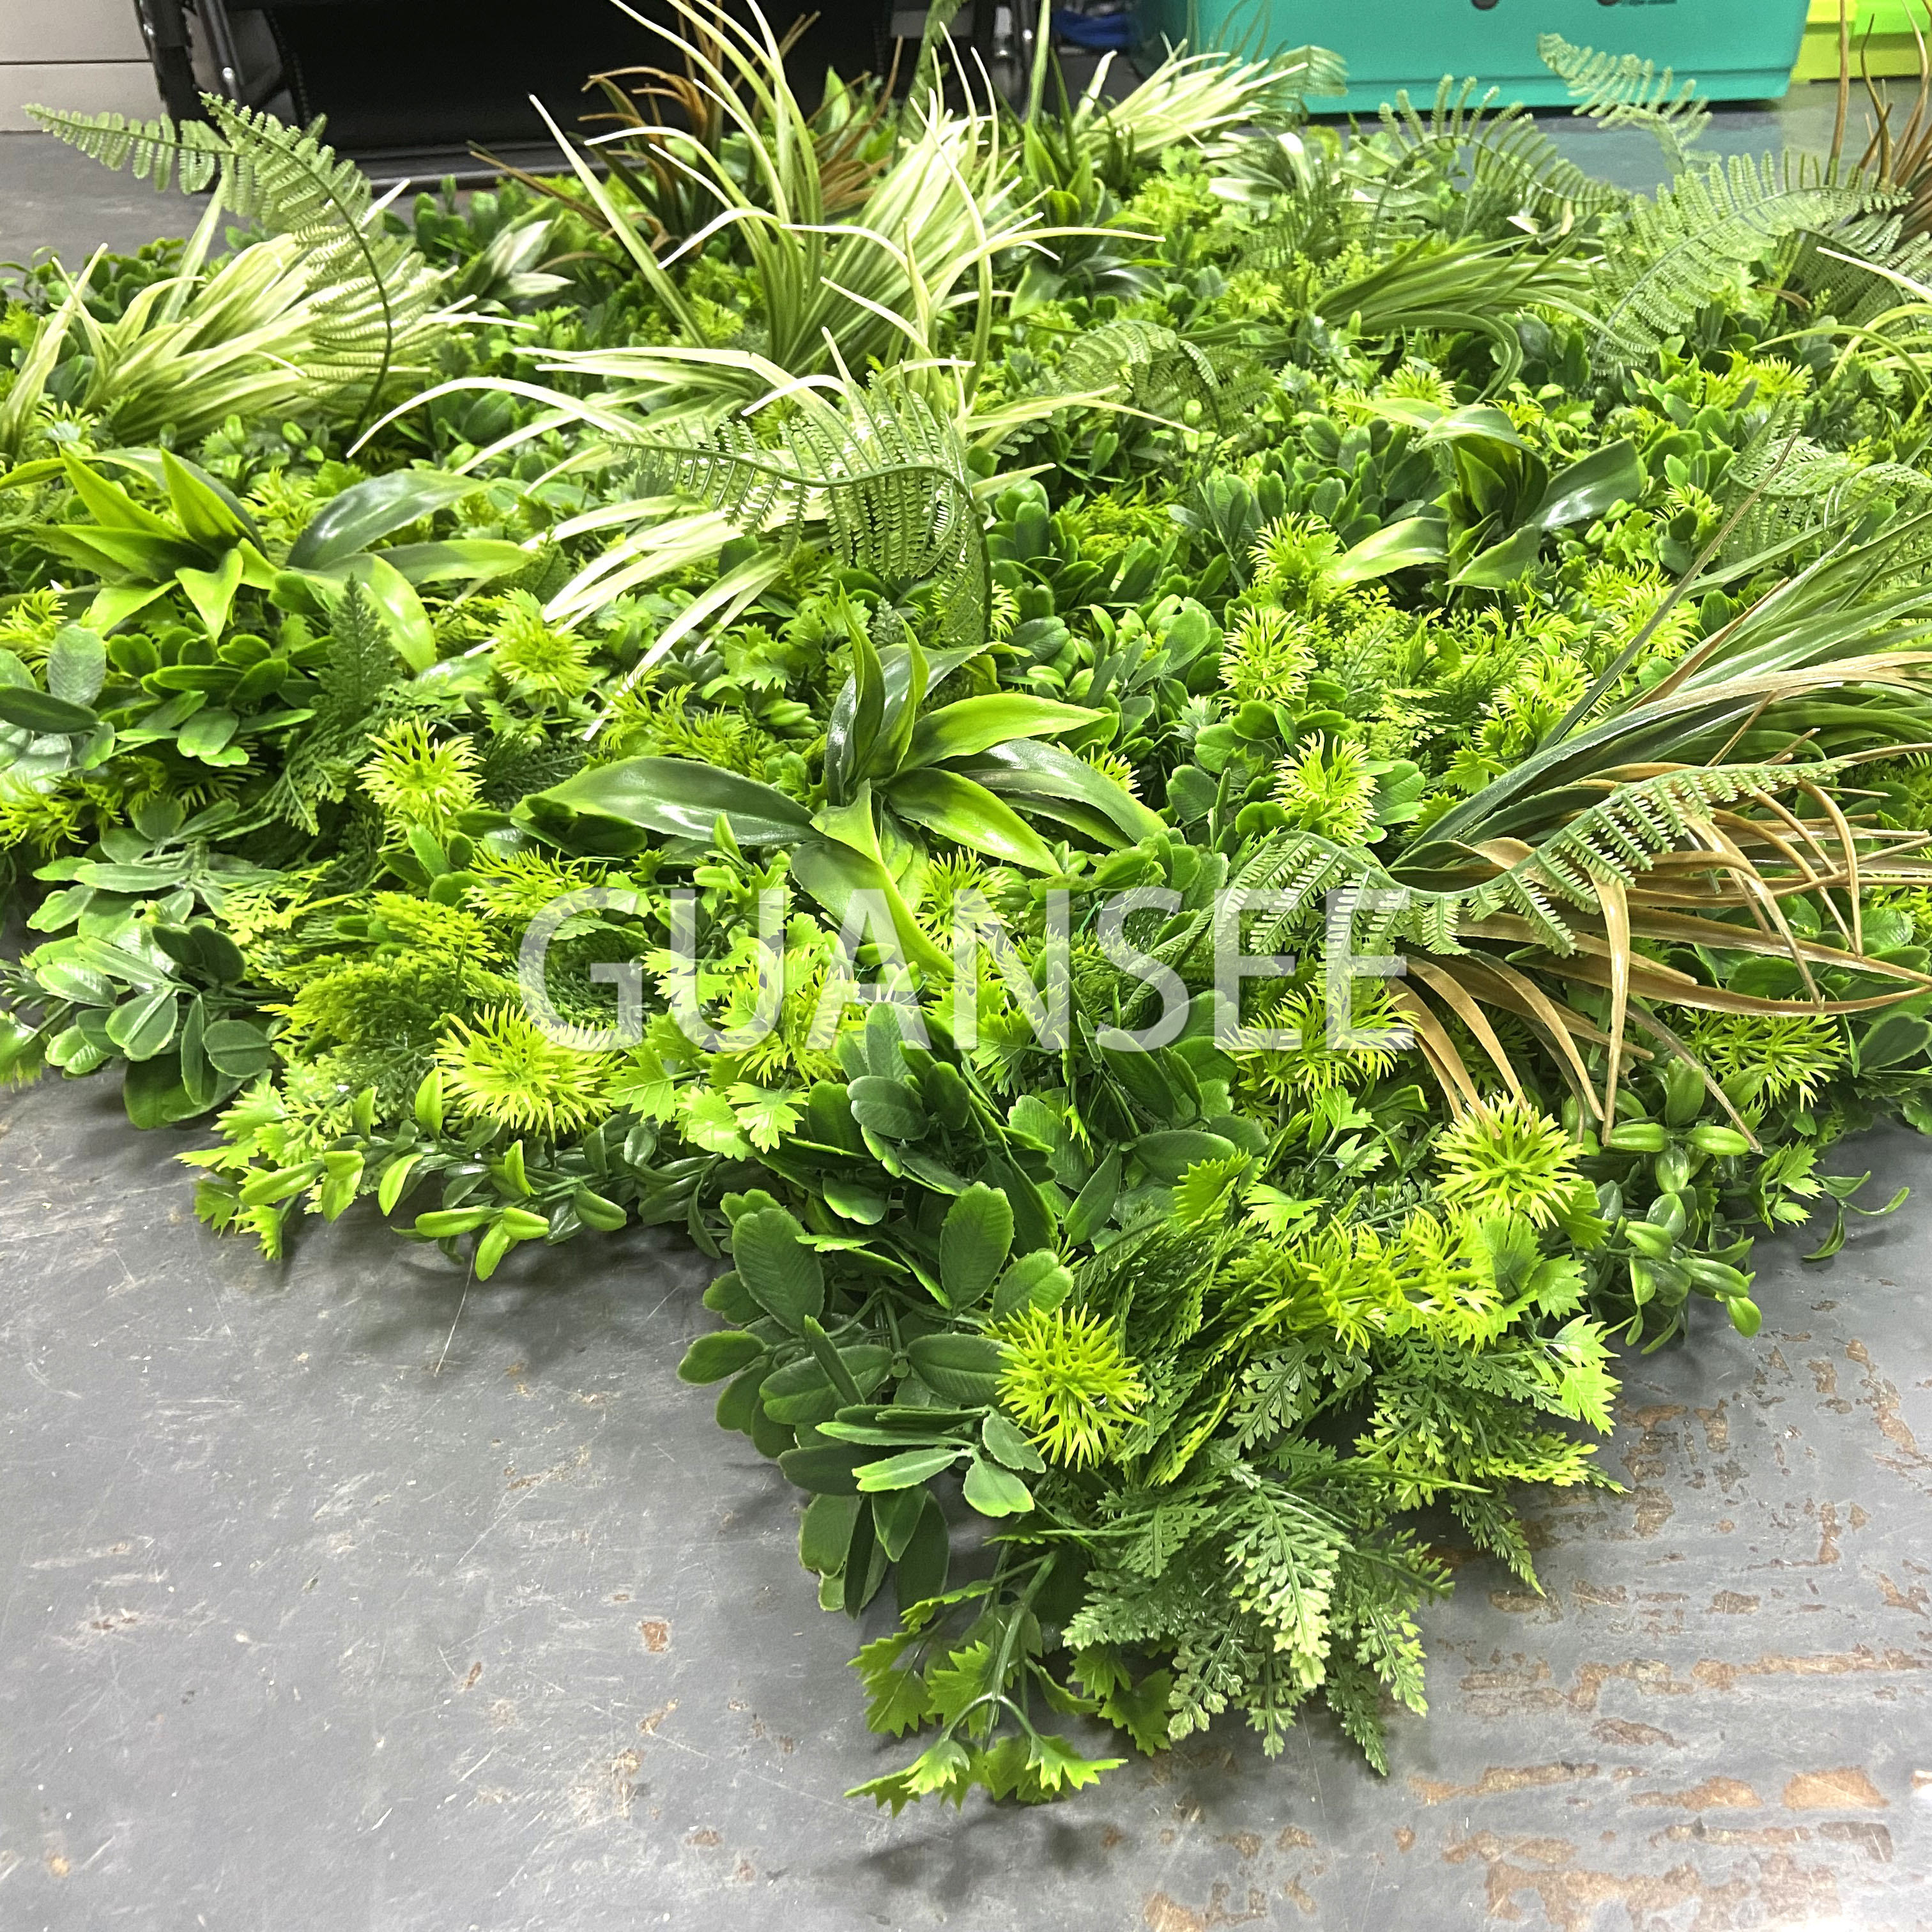 Simulated artificial plant wall, plastic green plant wall, wall decoration